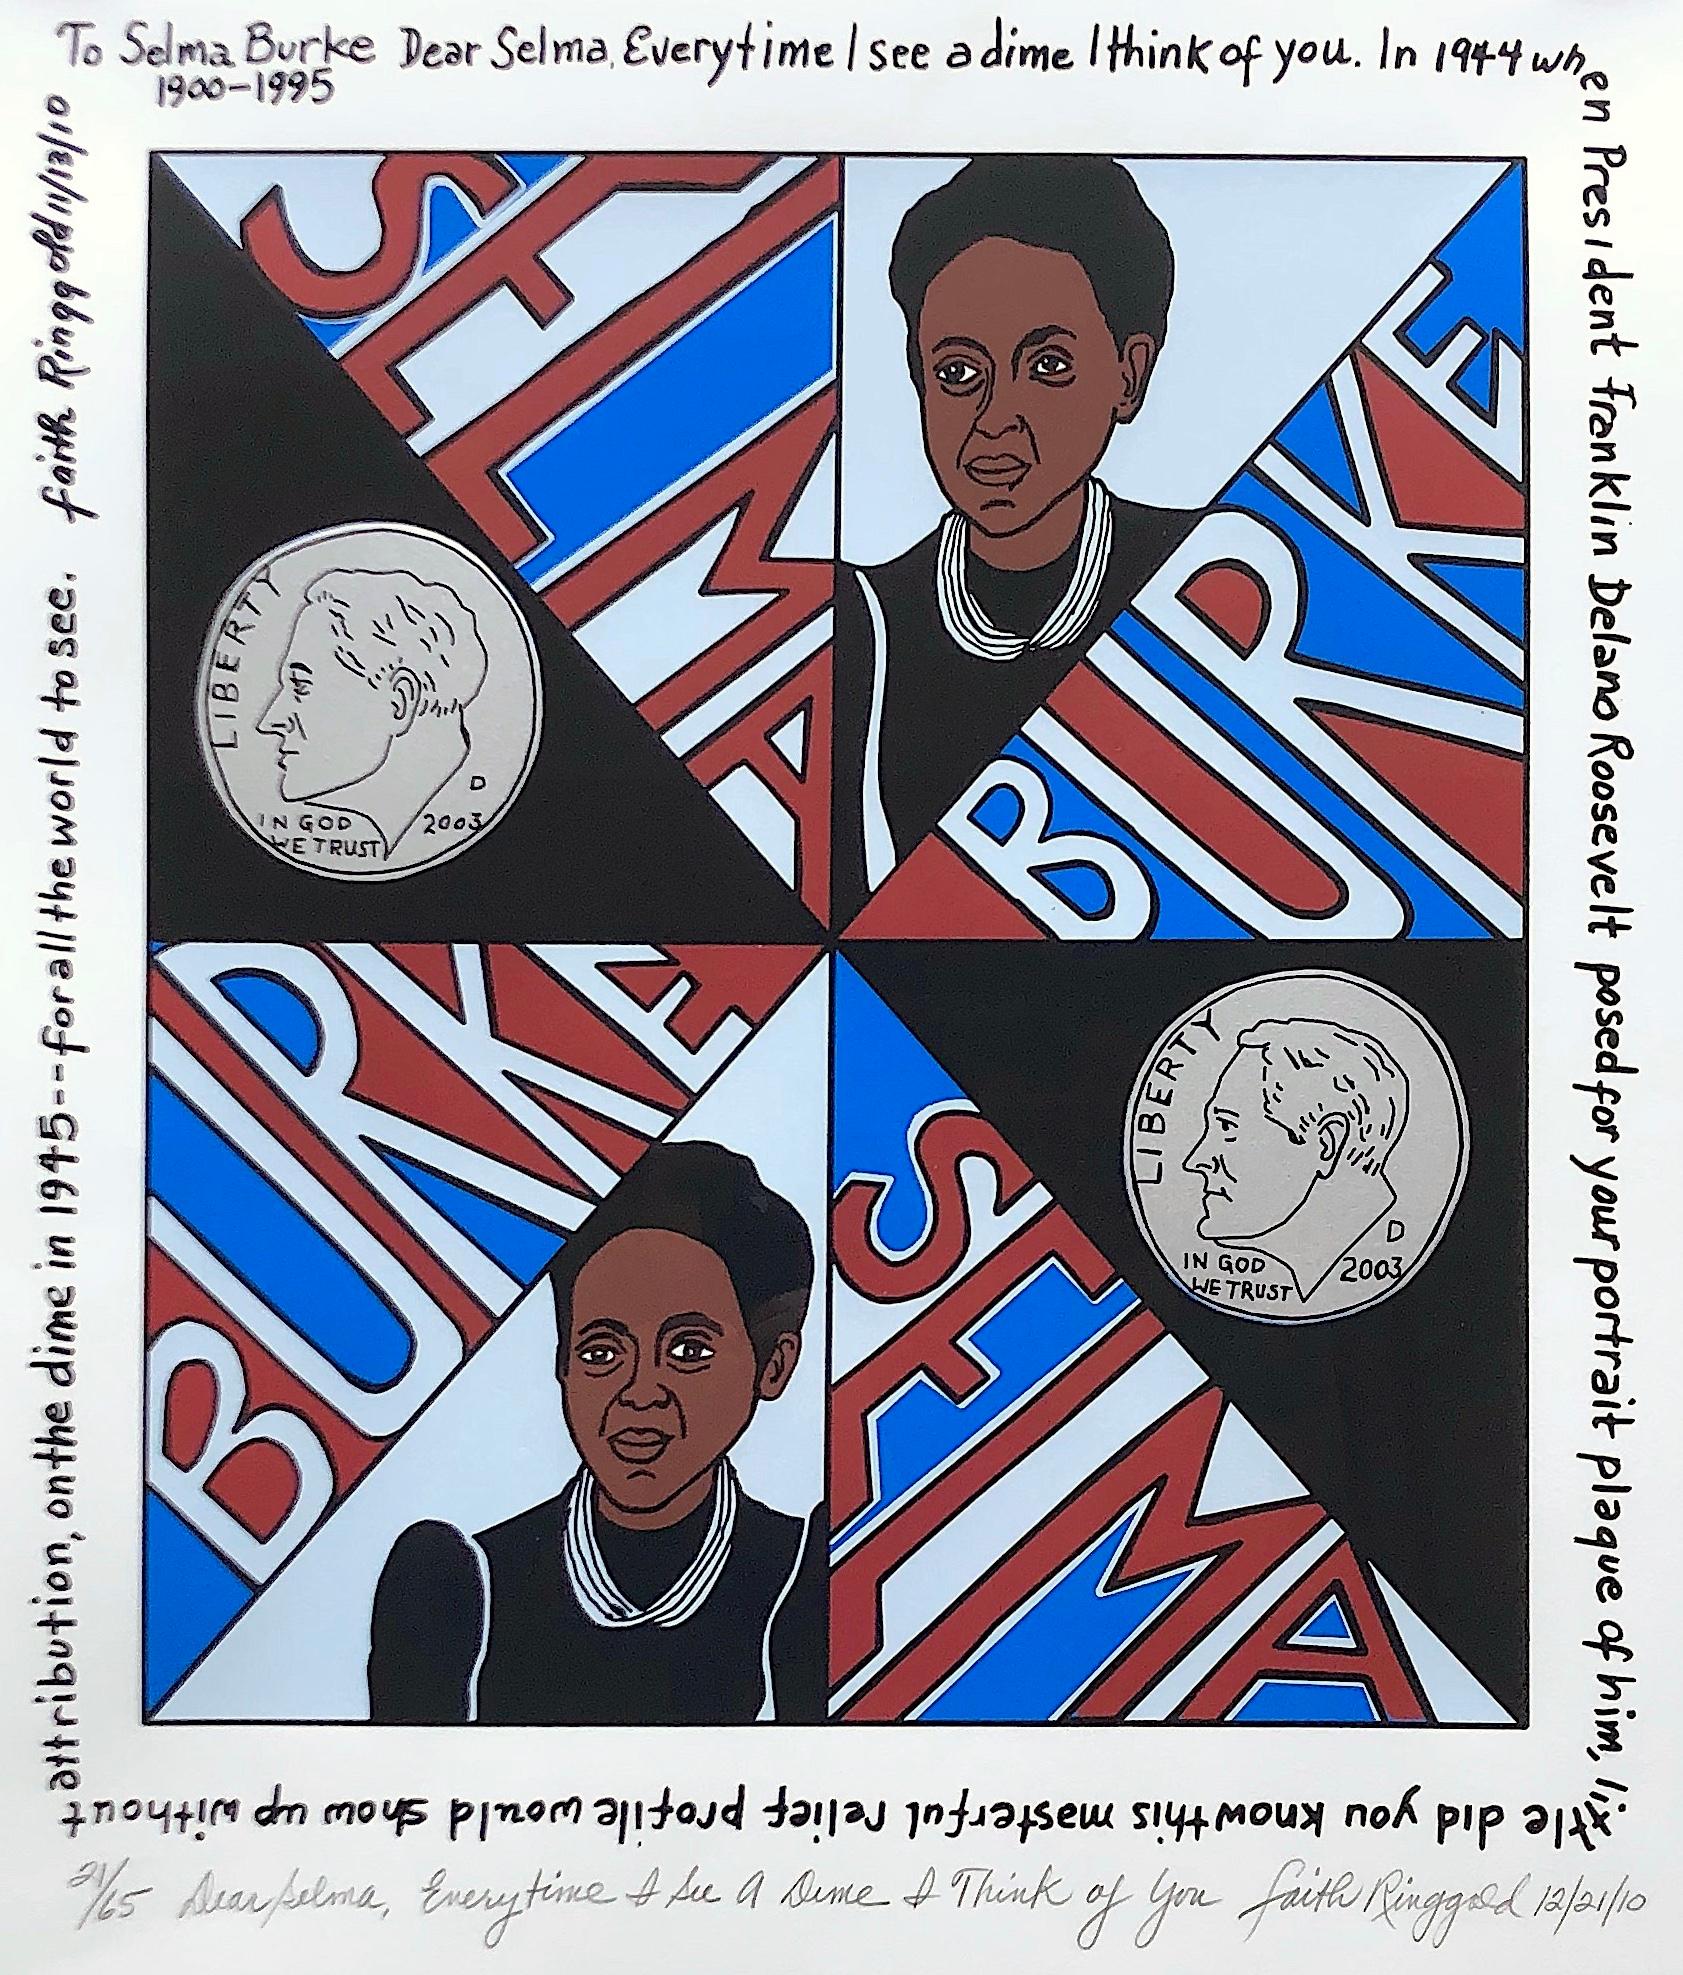 Faith Ringgold Abstract Print - Dear Selma, Every Time I See a Dime, I Think of You - framed print w/ red & blue